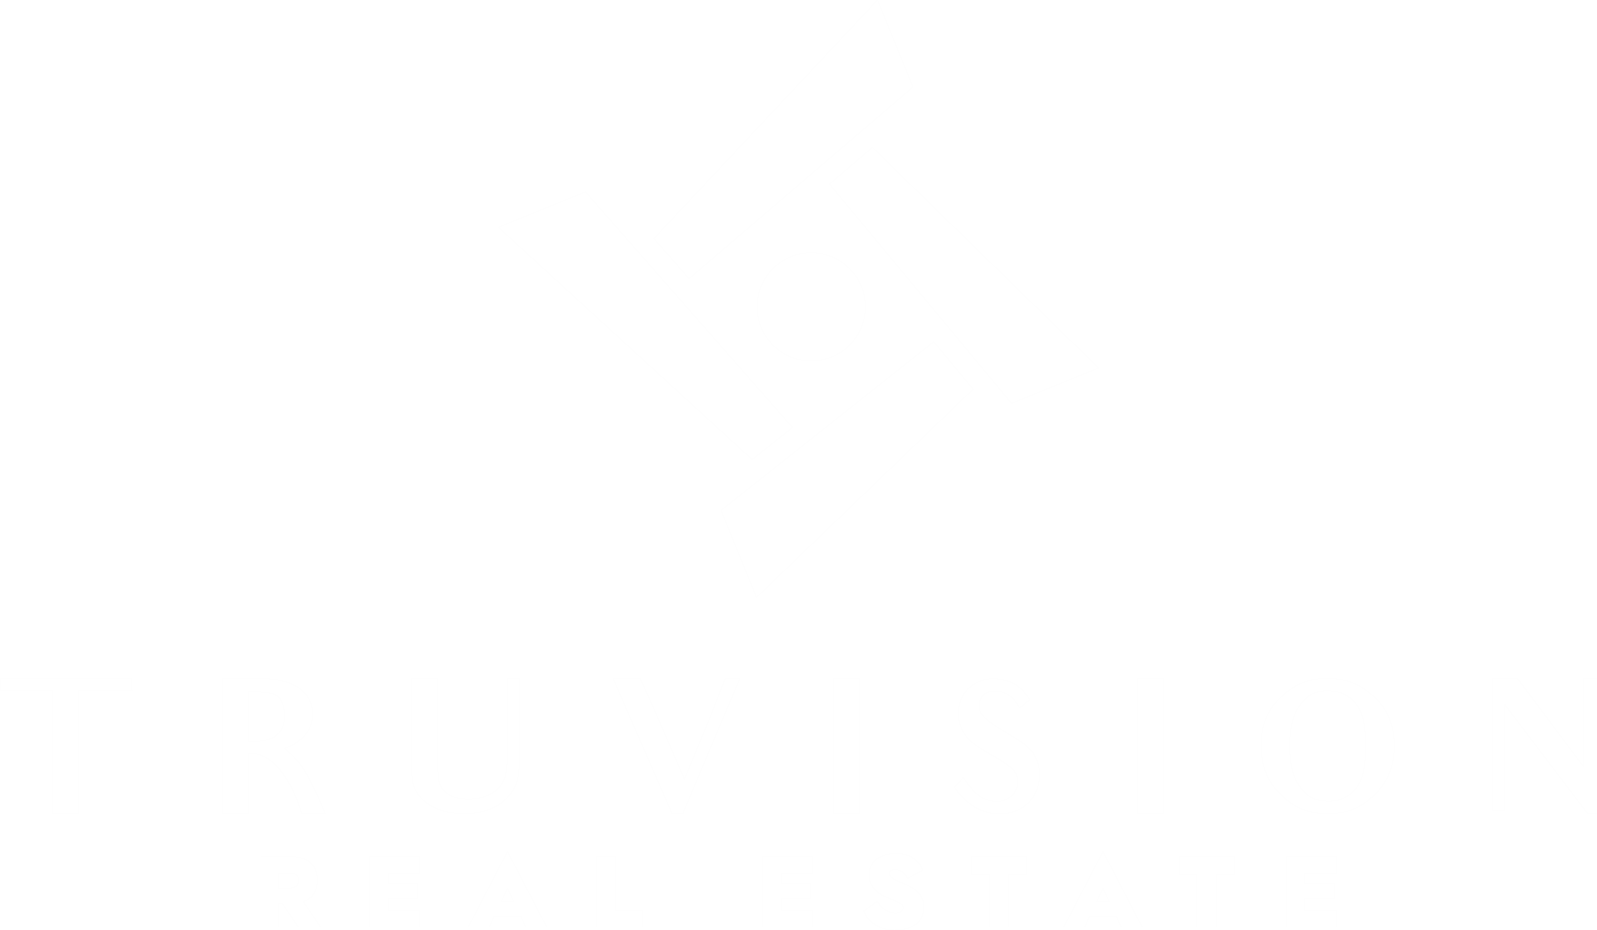 Truvision Real Estate